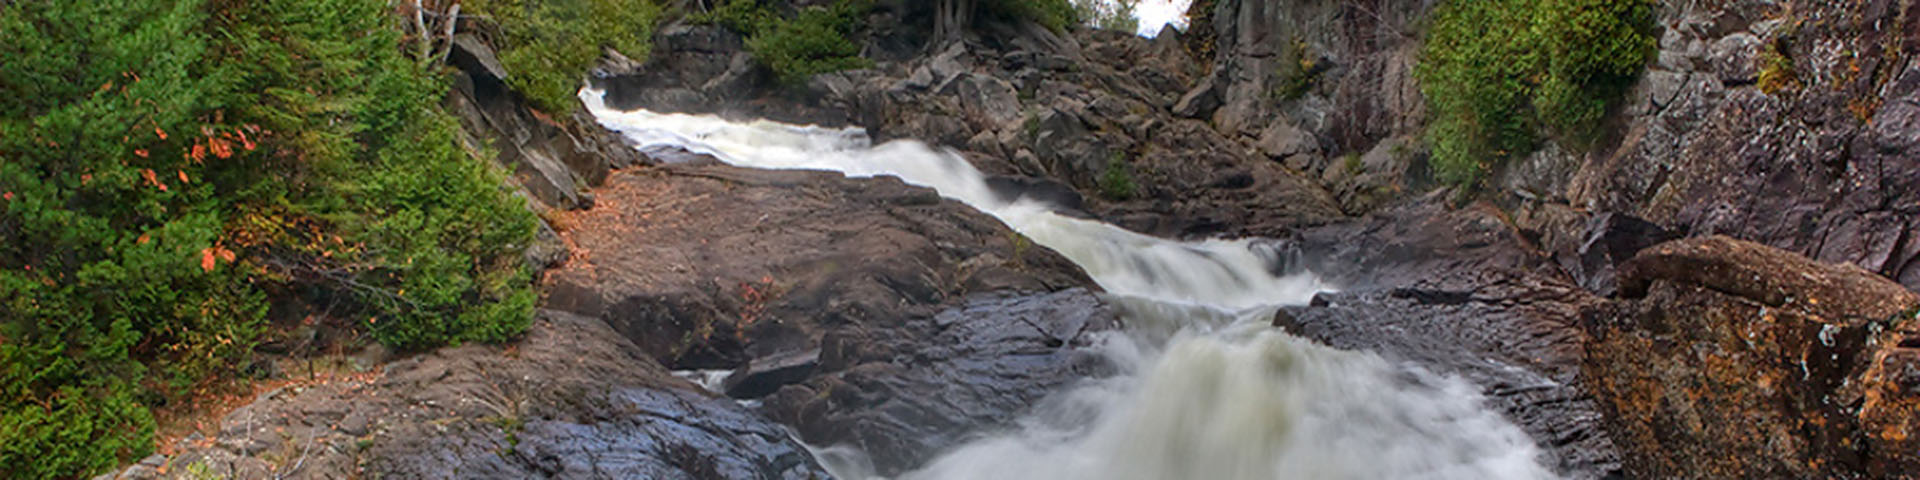 Ragged Falls Day Trip by Algonquin Outfitters - Image 315